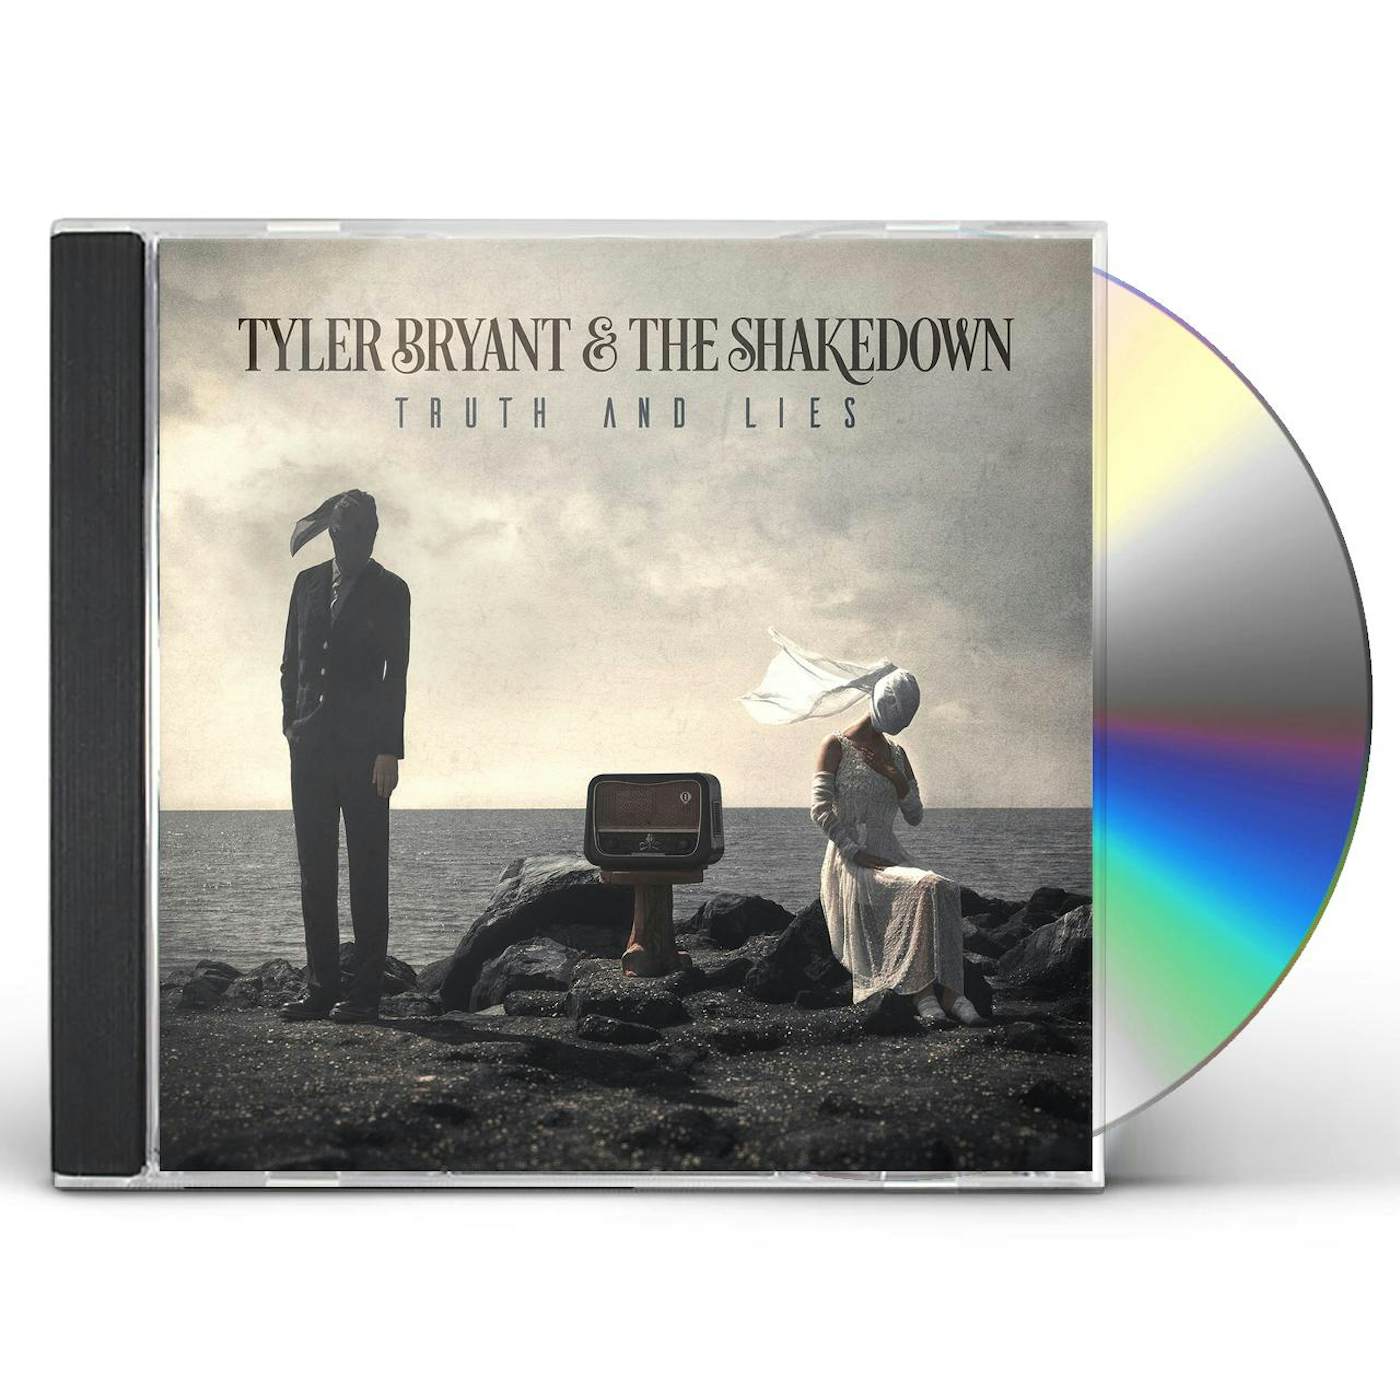 Tyler Bryant & the Shakedown TRUTH AND LIES CD